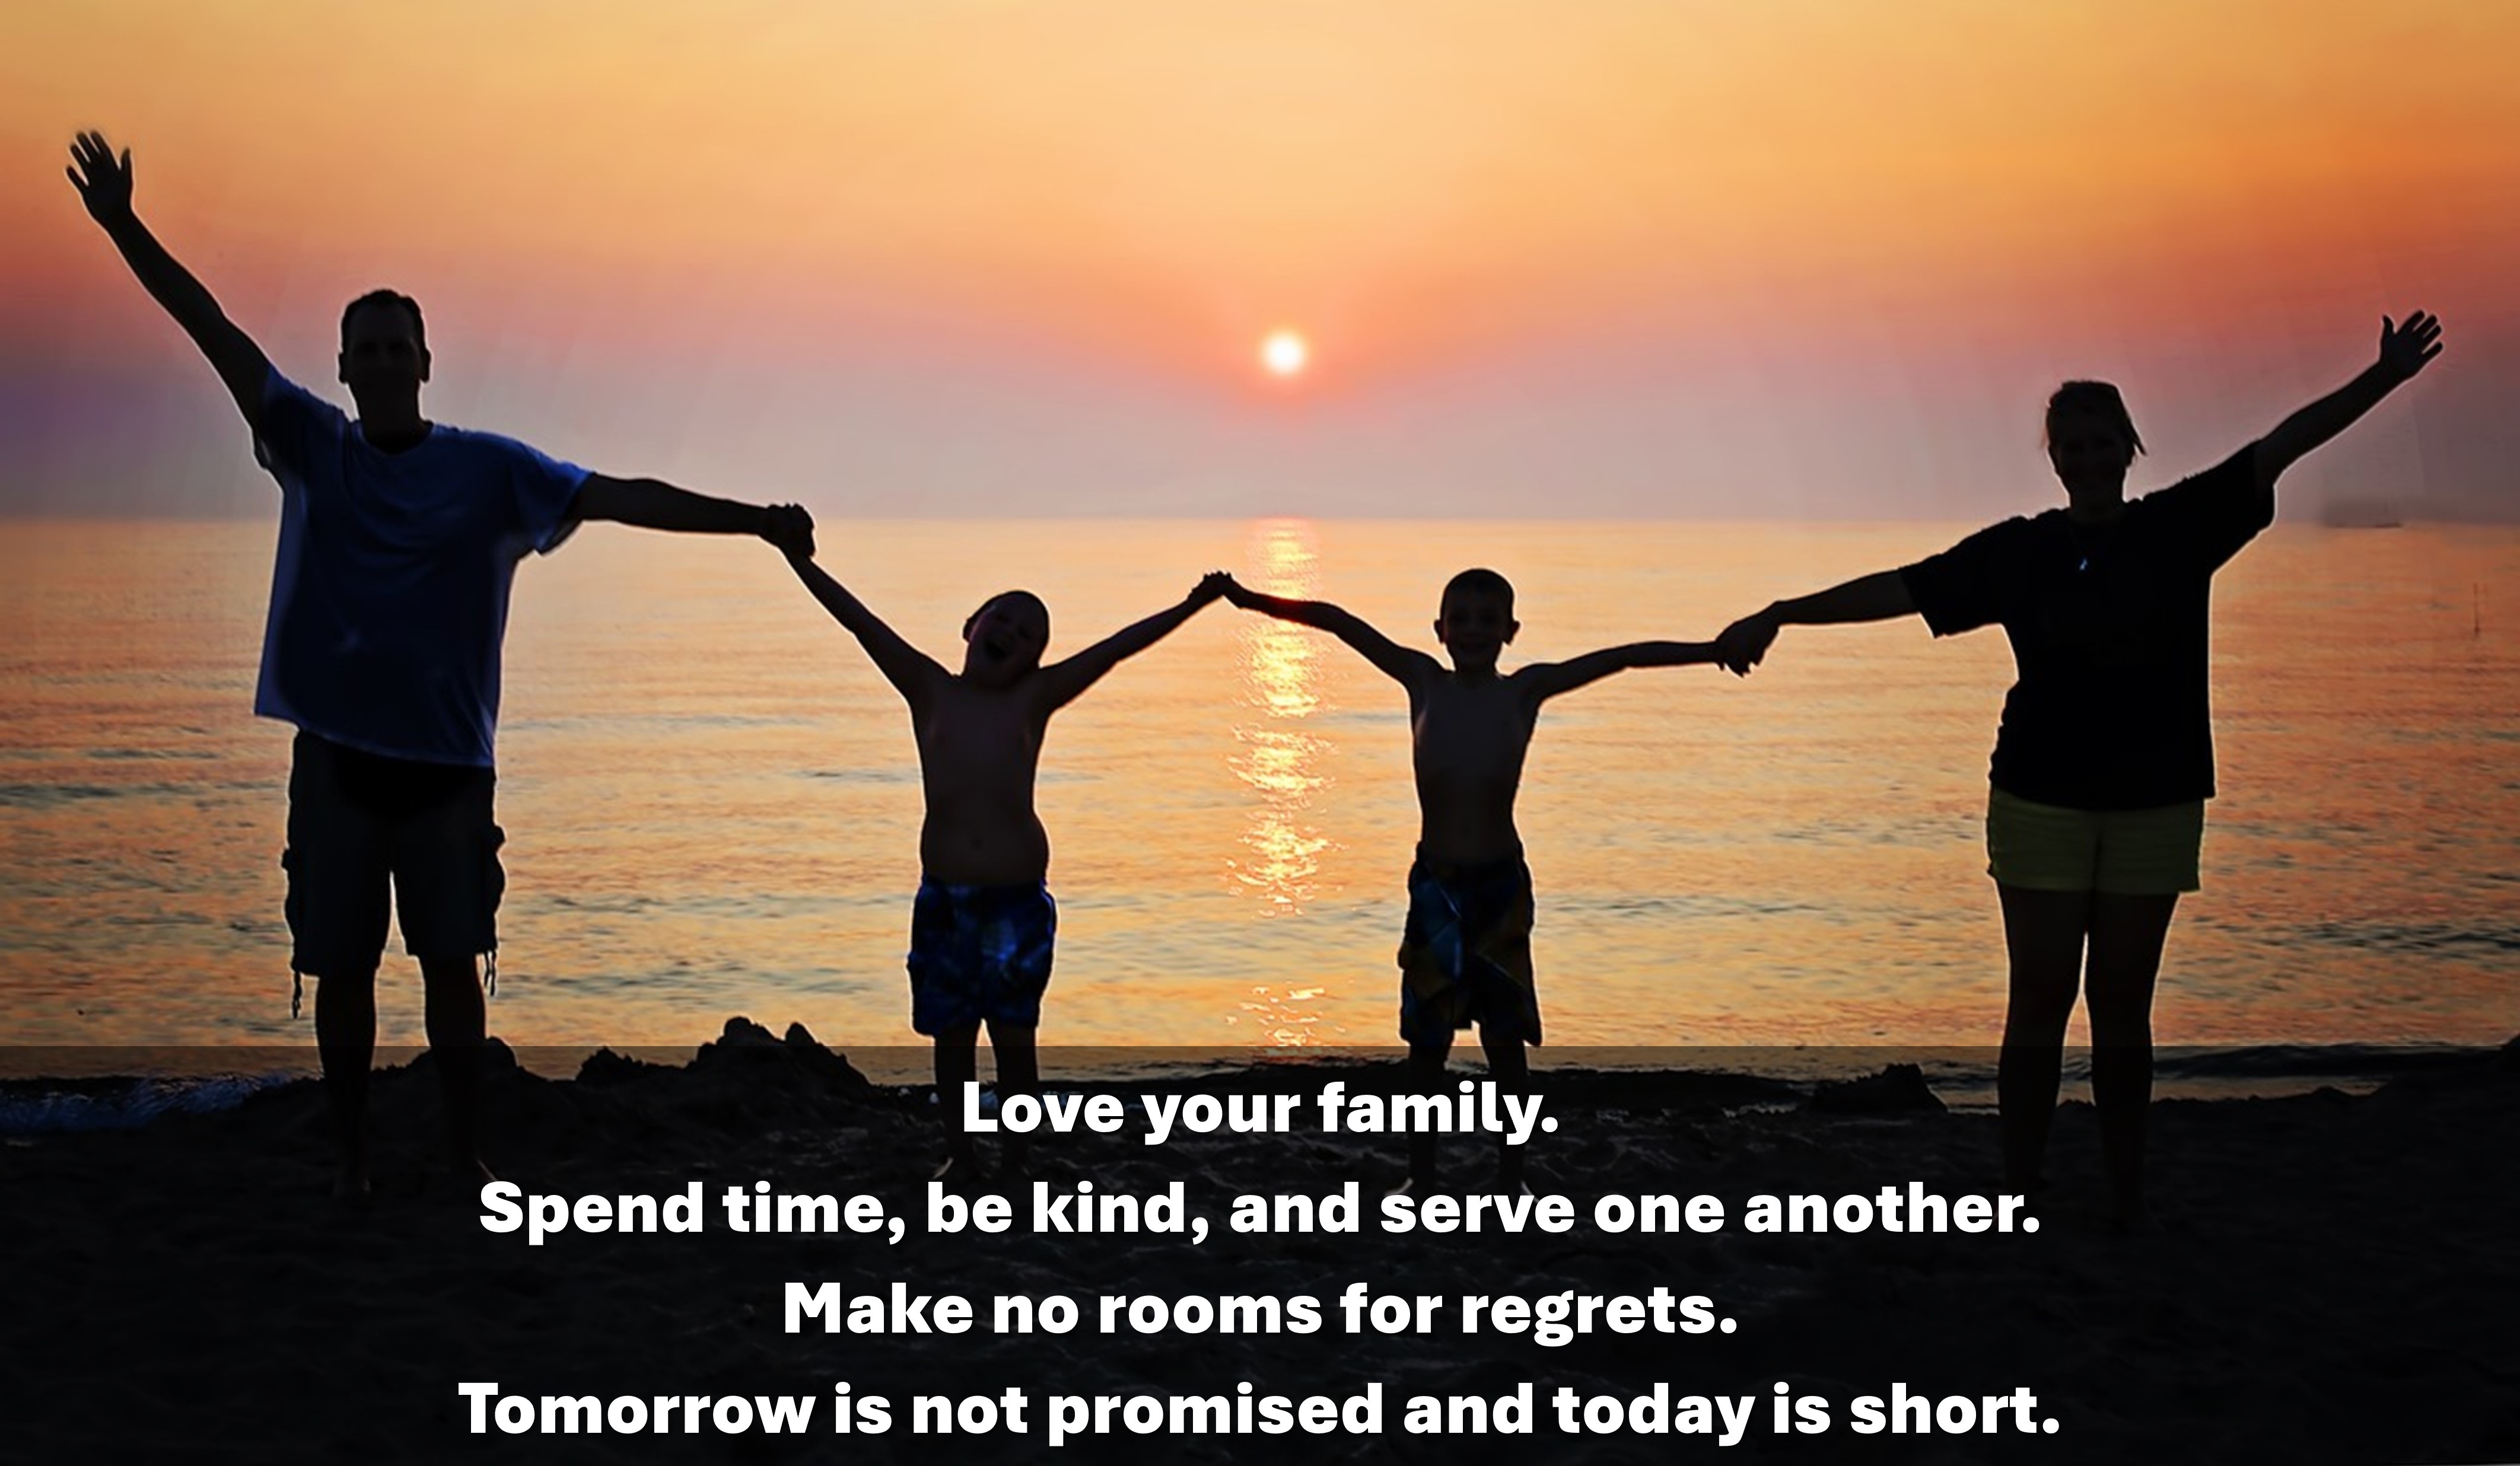 Love your family.
Spend time&#44; be kind&#44; and serve one another.
Make no rooms for regrets.
Tomorrow is not promised and today is short.